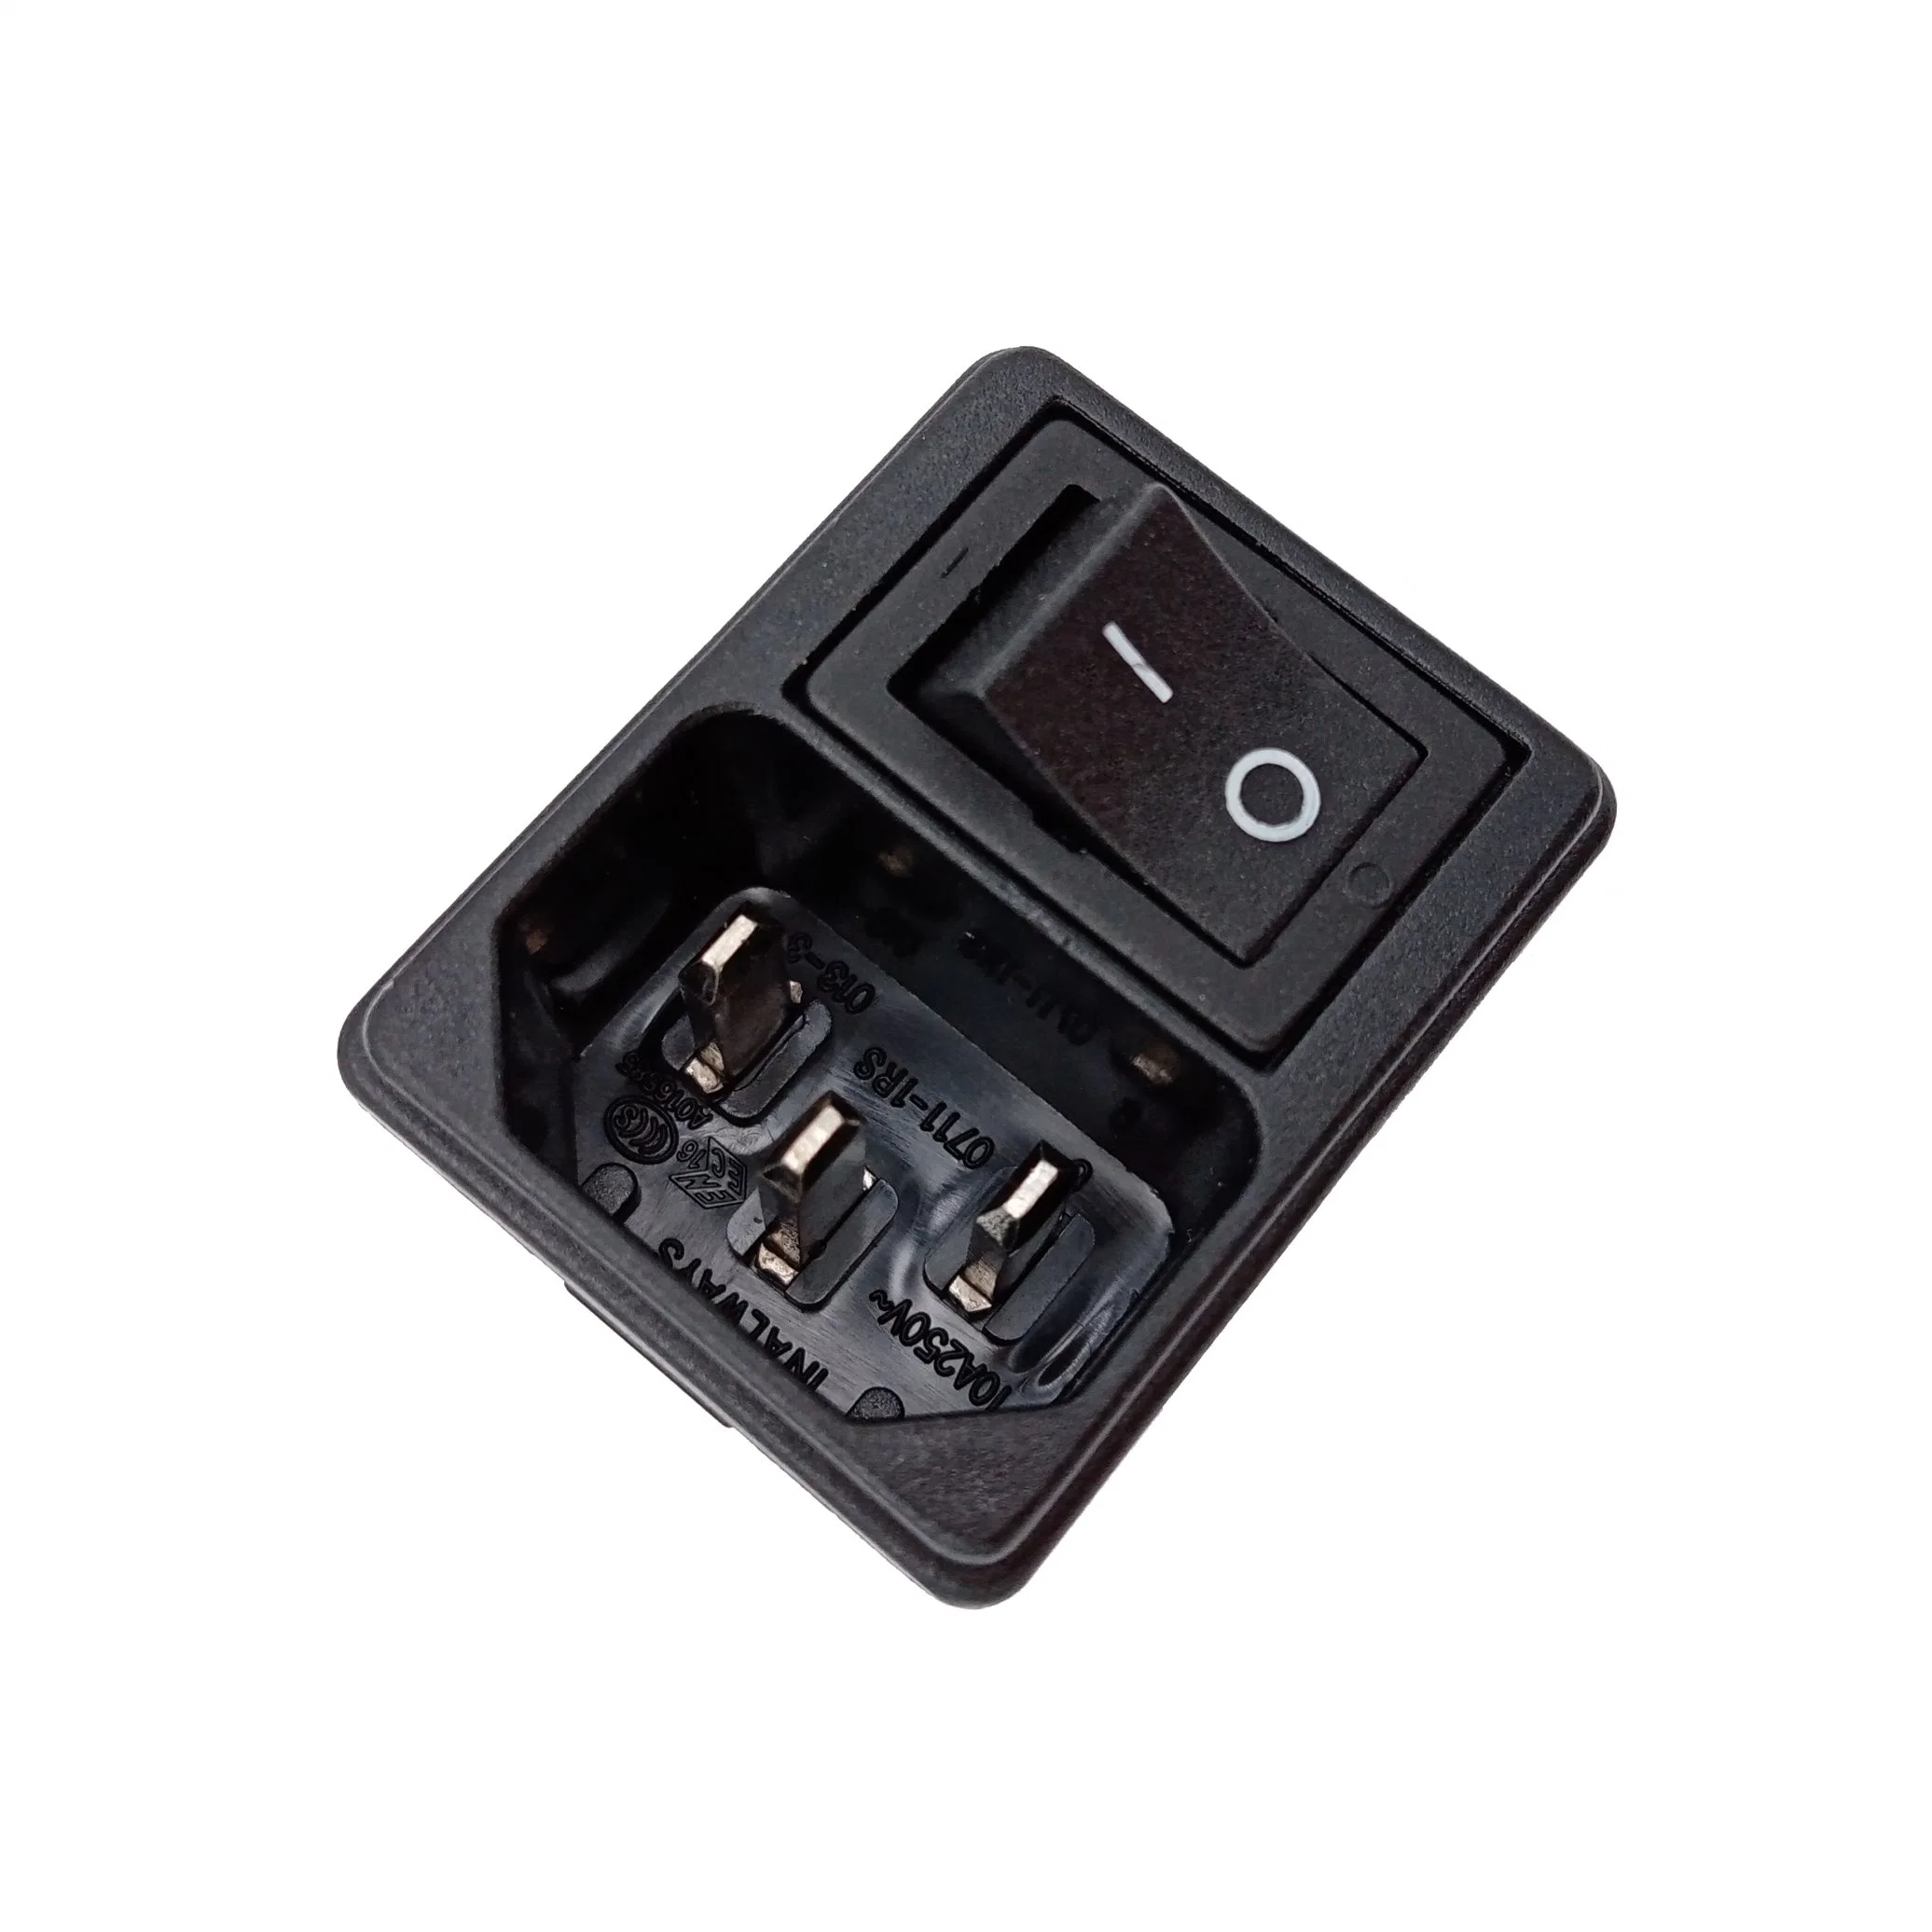 IEC Electrical Switch Connectors C14 Inlet Panel Mount AC Male Power Socket with Rocker Switch for Automotive Parts